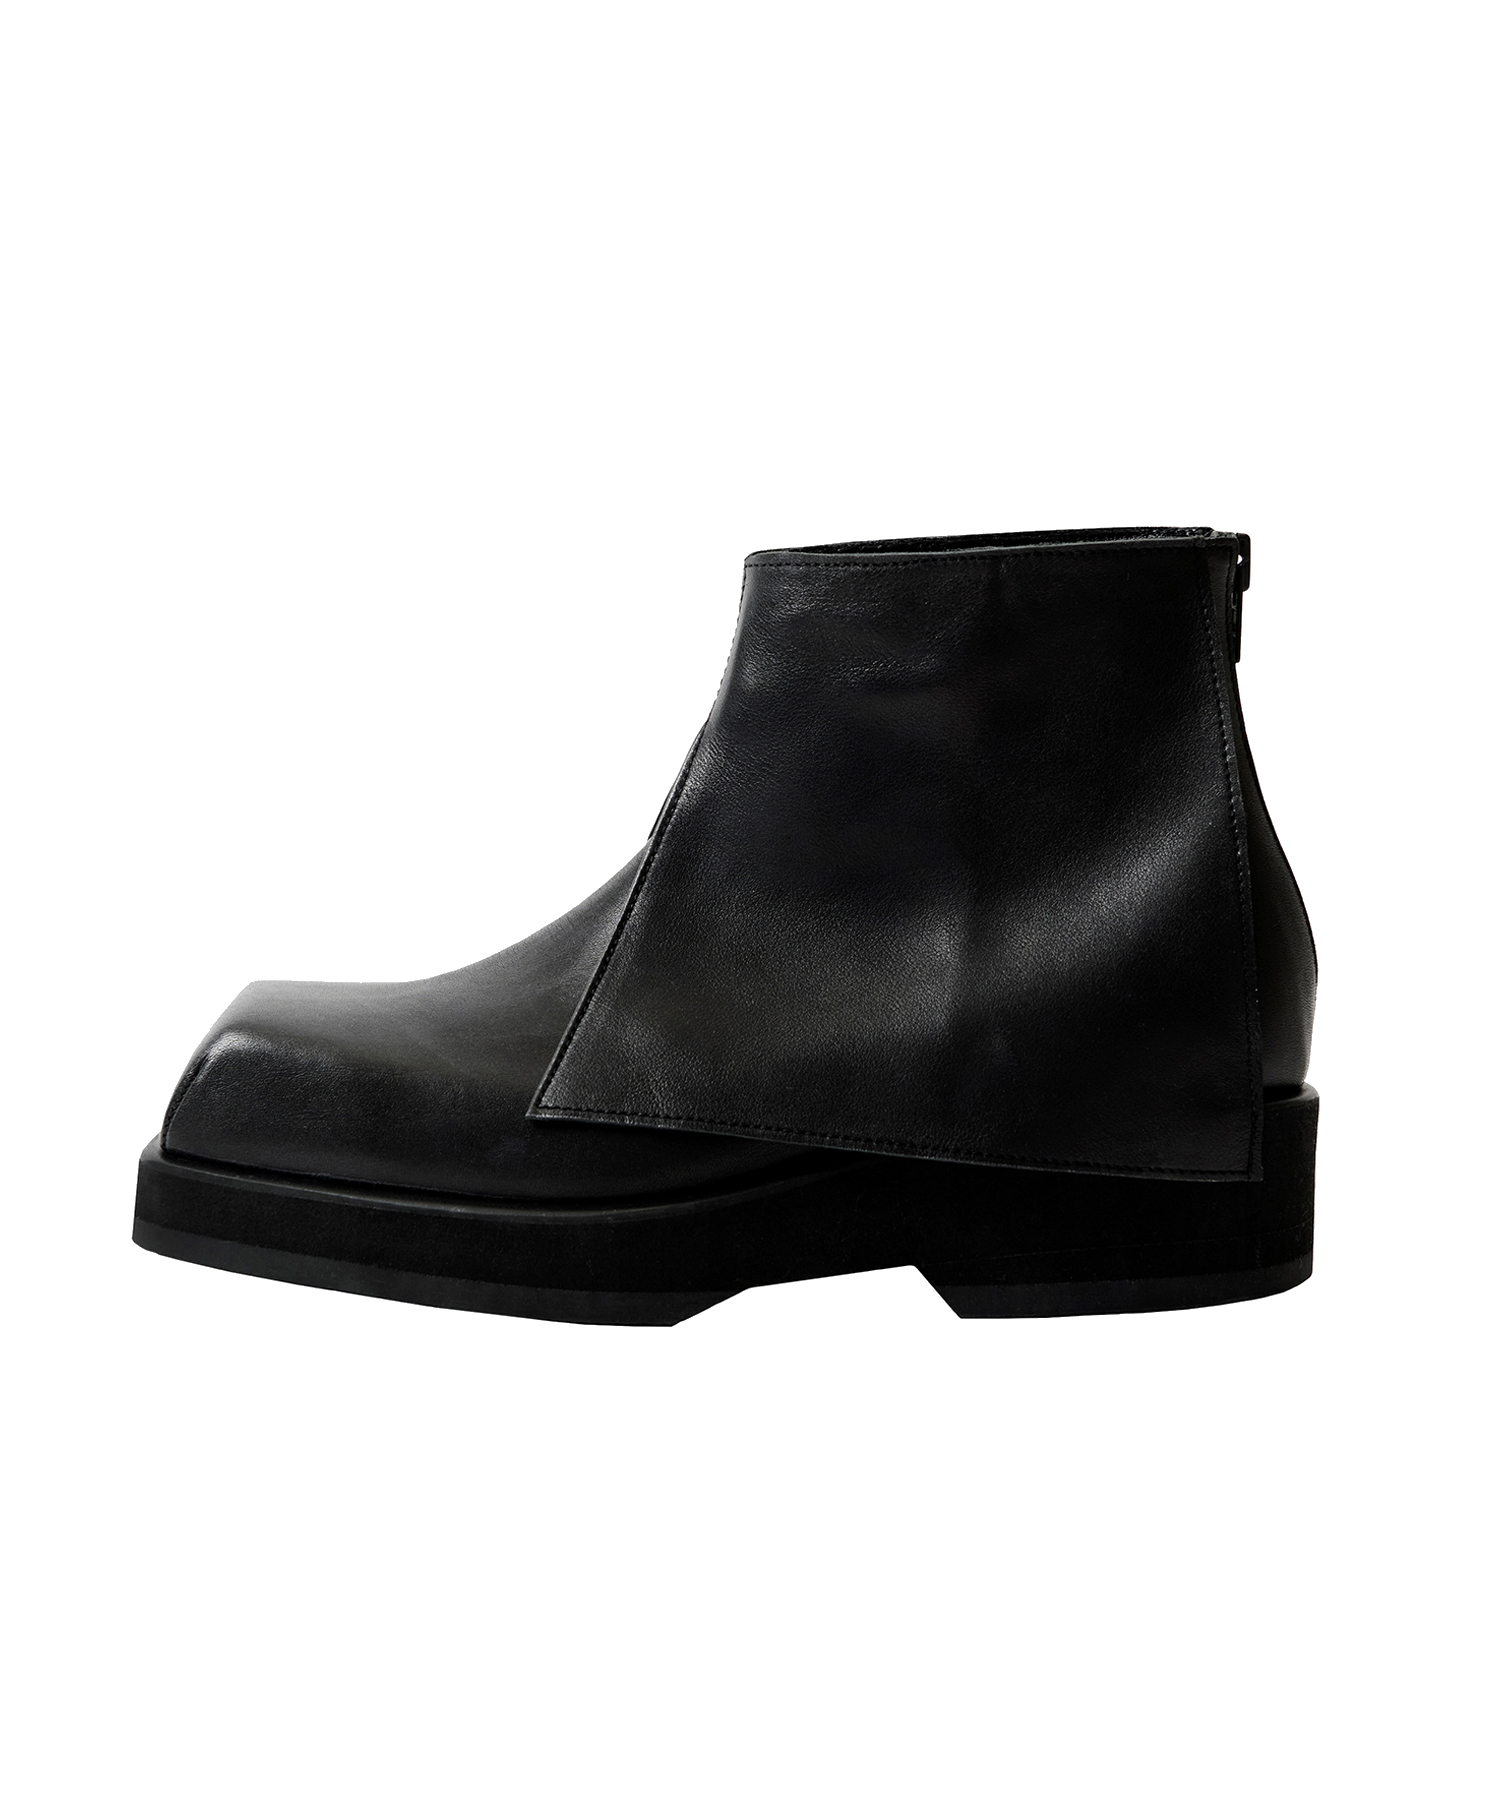 LMMM SQUARE COVER BOOTS